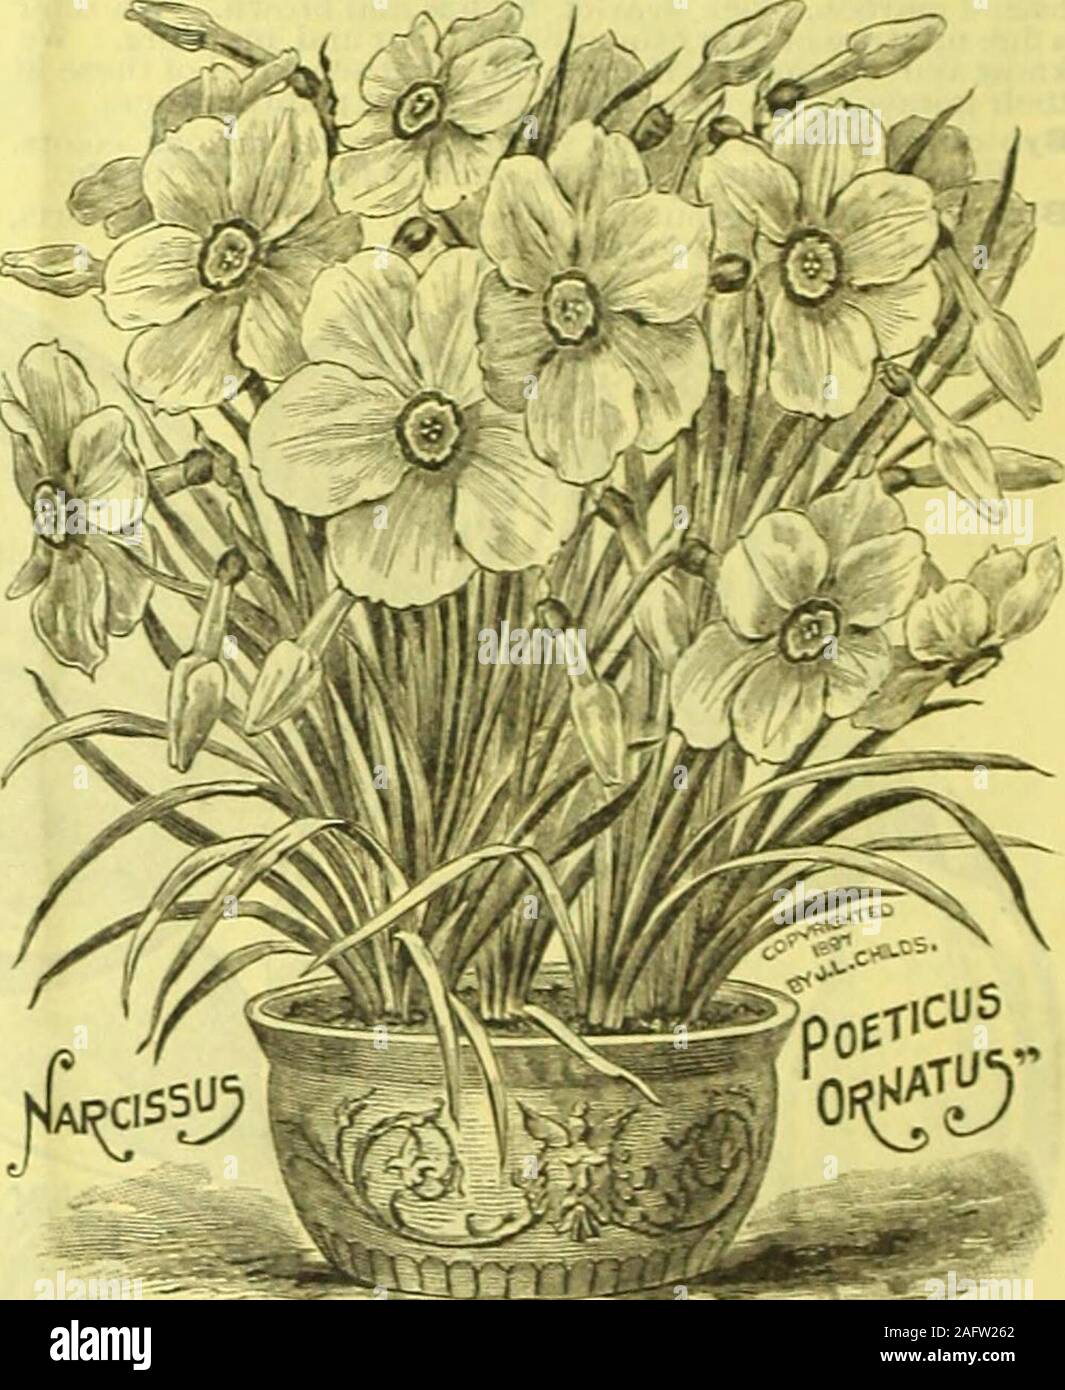 . Childs' fall catalogue of bulbs and plants that bloom. cross, with broadwing-like petal* that shade from canary yellow at thetips to golden yellow base. Cup, golden yellow. Colden Plover—Large, golden yellow, round shap&lt; greatsize and beauty. Moschatus—Largo, trumpet-shaped flower of a pure white color throughout. The blossoms are of exquisite shapeand pendulous or nodding, unlike any other sort. Emperor—Broad, rich yellow trumpet, perianth deep prim-rose. Its foliage is very strong and the blooms enormous. Empress—Possesses the same gigantic size and flue form ofEmperor, but with golden Stock Photo